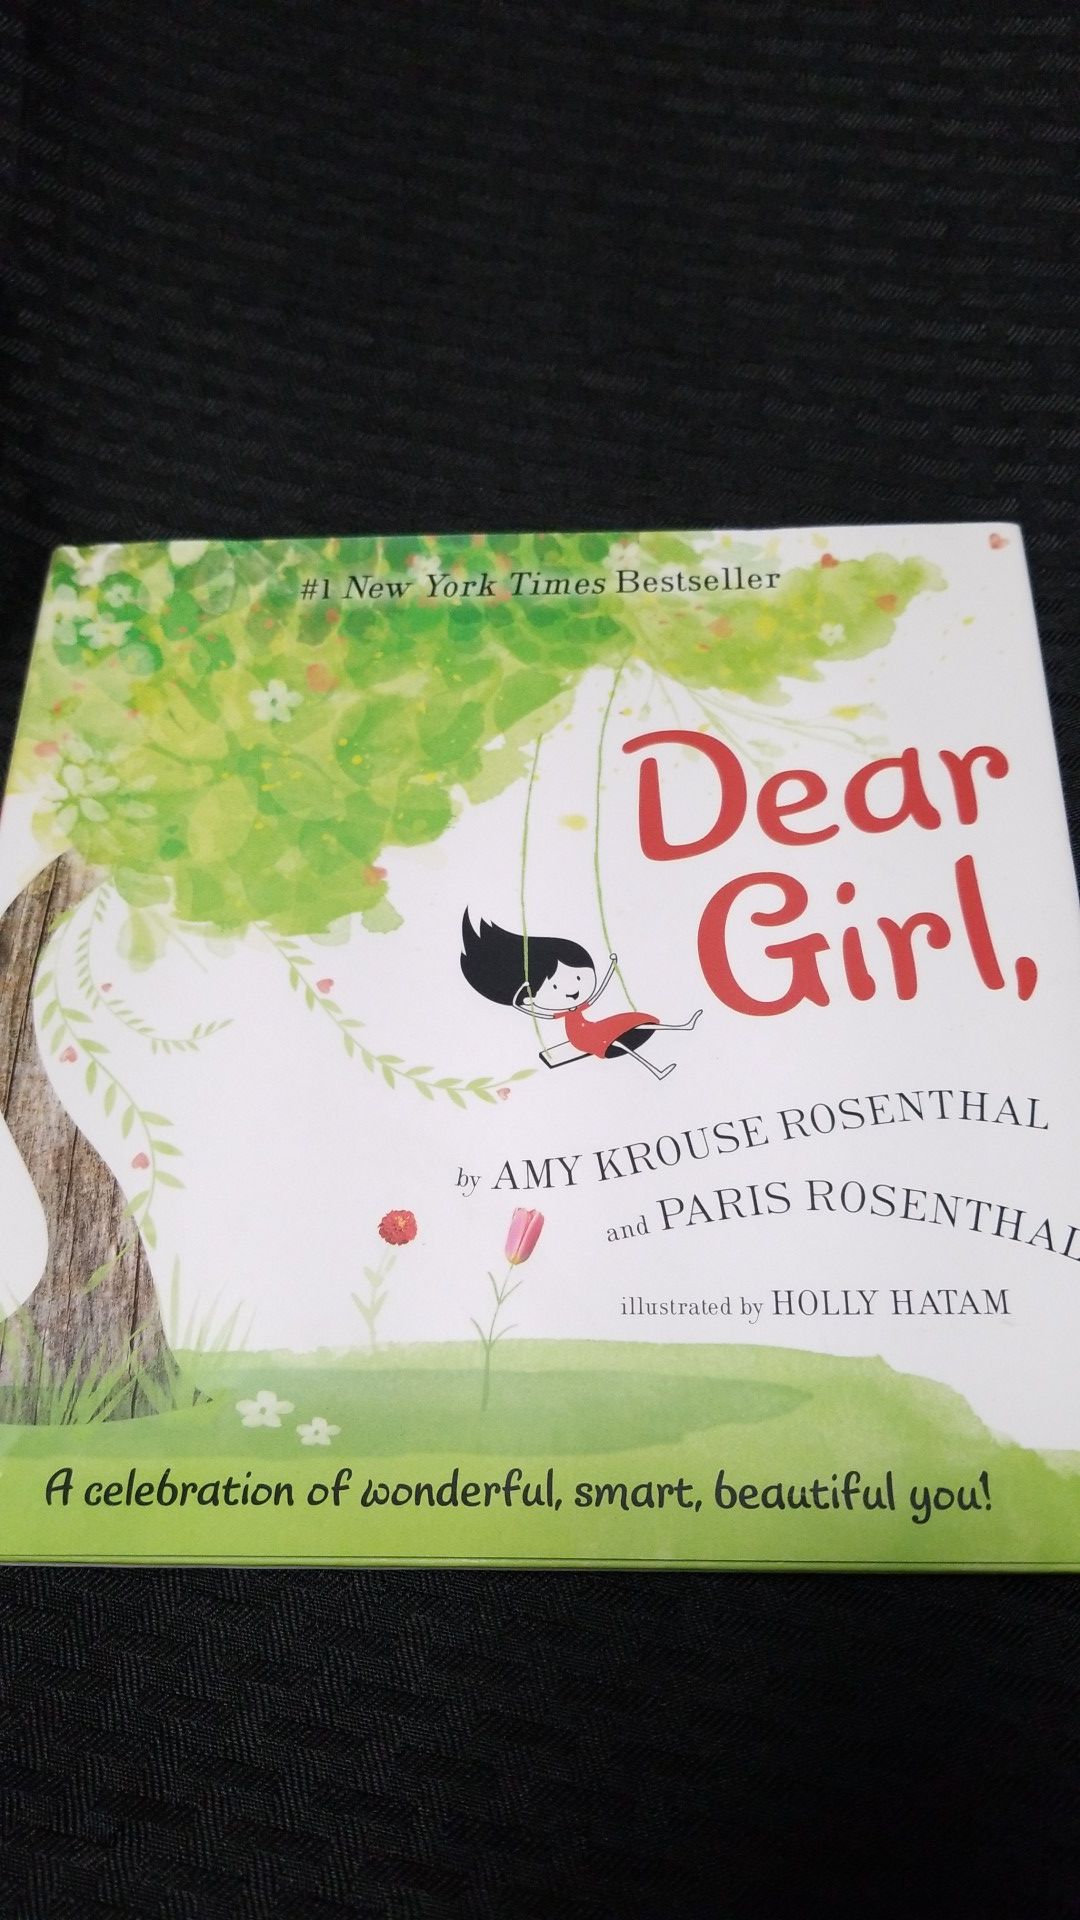 Book Dear Girl by Amy Krouse Rosenthal and Paris Rosenthal